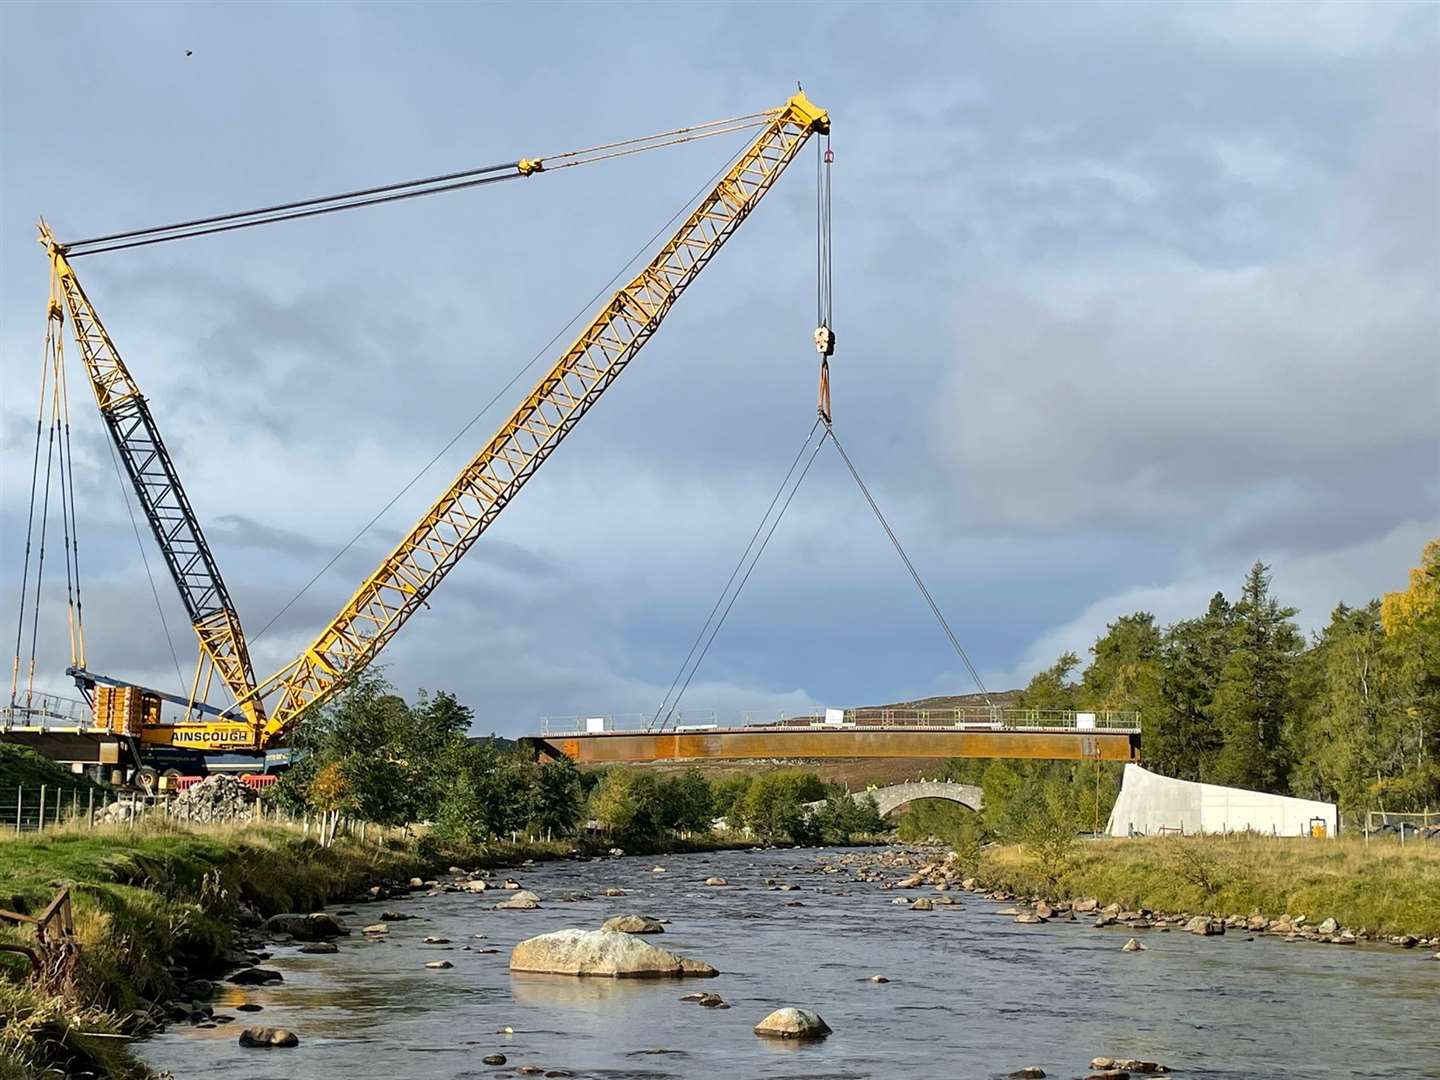 The beam is lifted into place at Gairnsheil